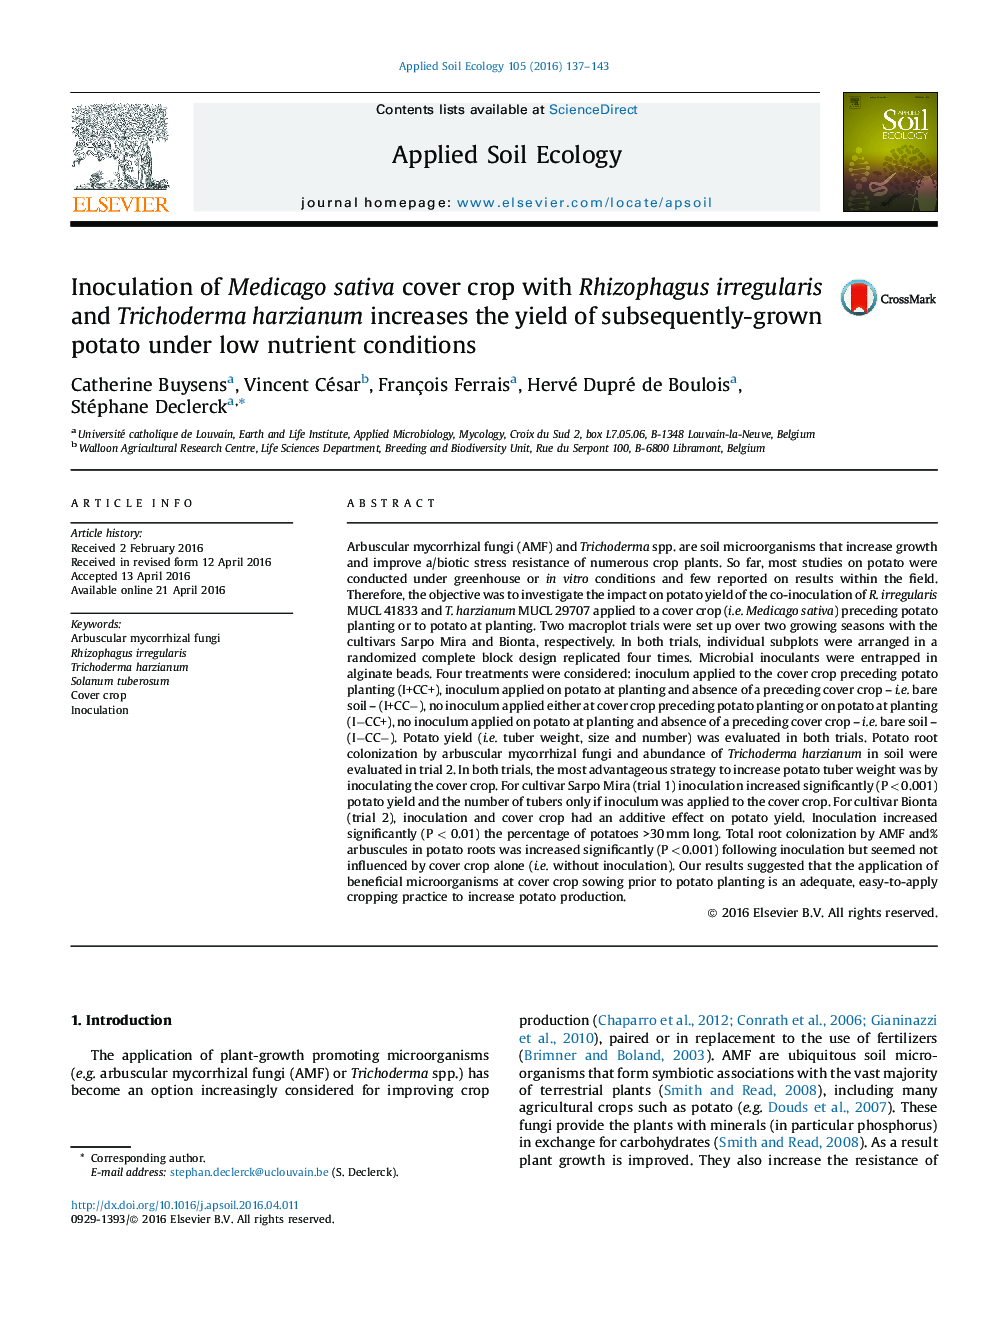 Inoculation of Medicago sativa cover crop with Rhizophagus irregularis and Trichoderma harzianum increases the yield of subsequently-grown potato under low nutrient conditions